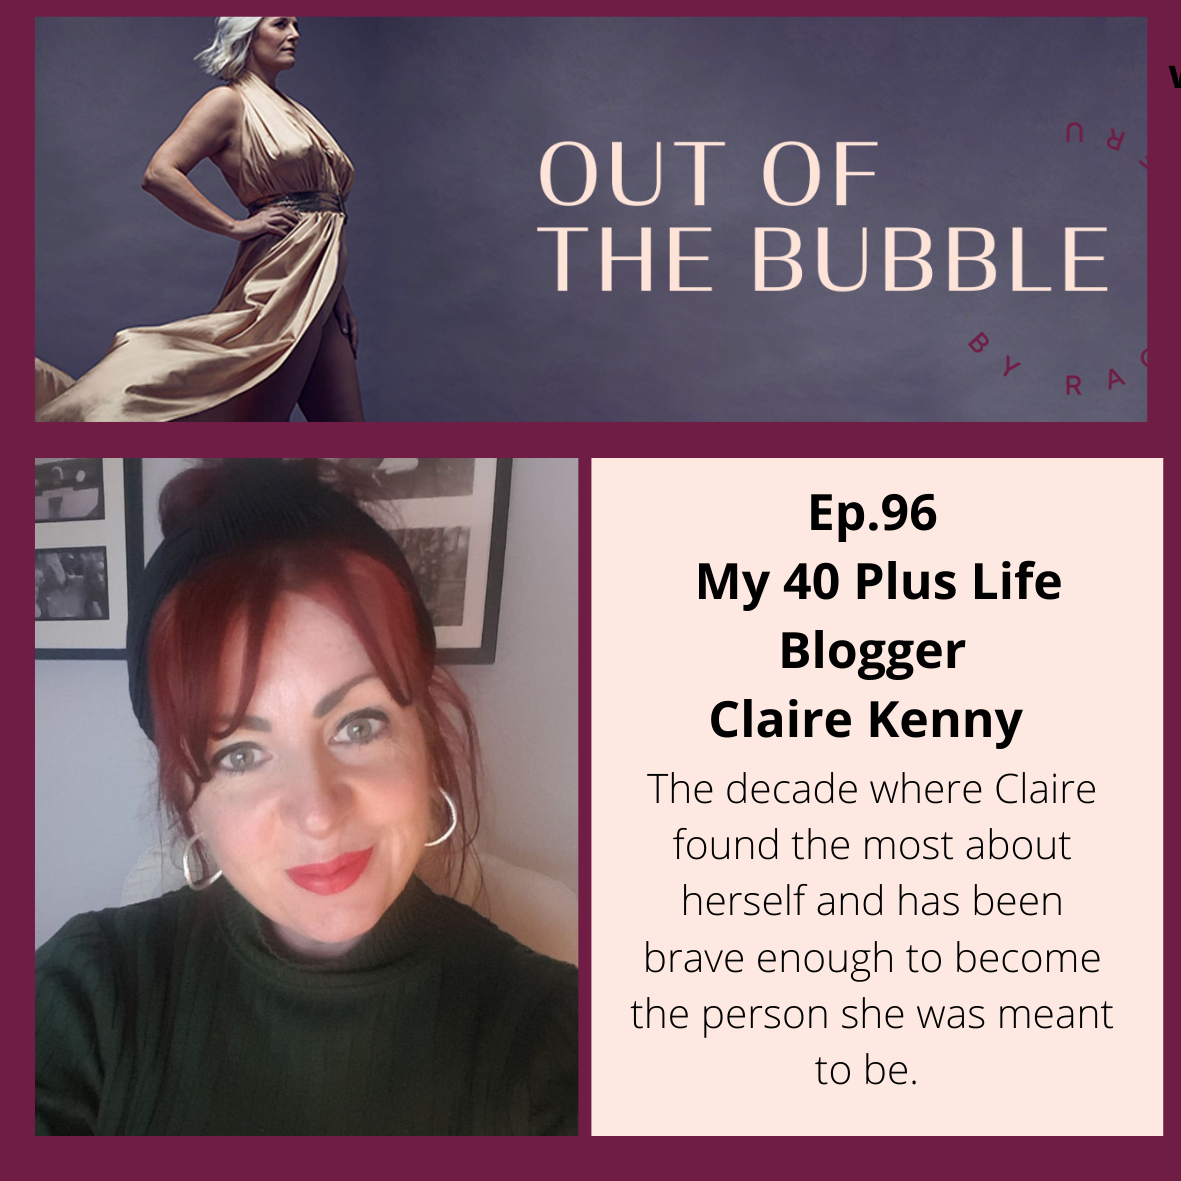 Ep.96 Liberte Free to Be with My 40 Plus Life blogger, Claire Kenny.